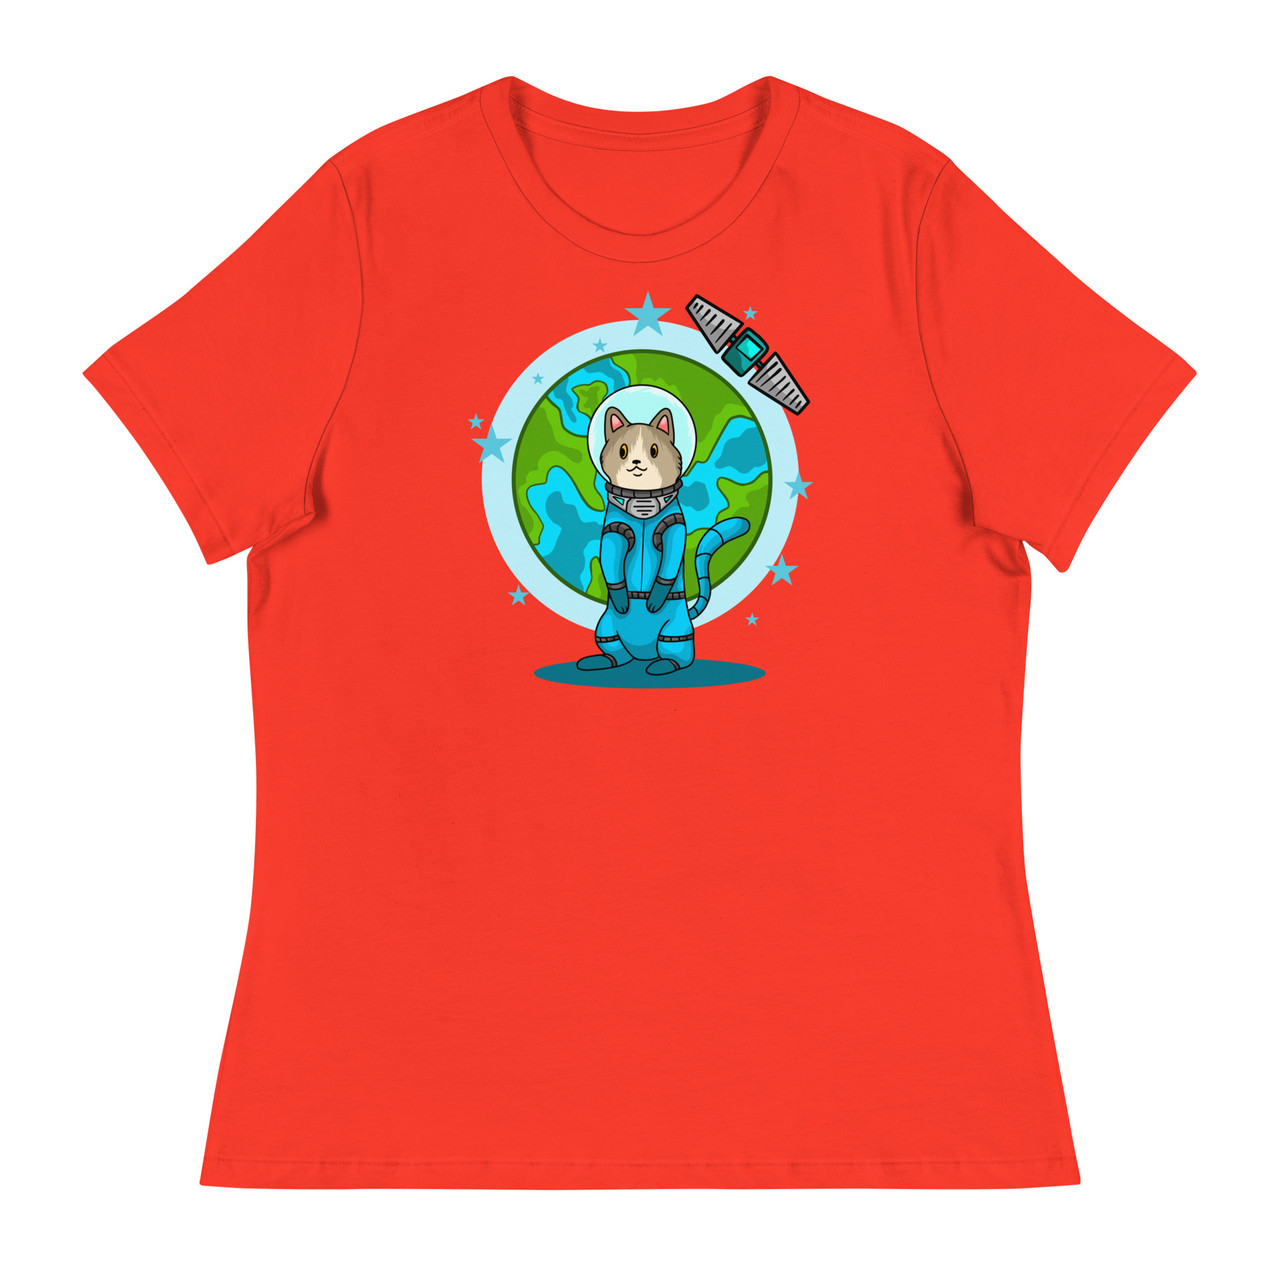 Planet Astro Cat Women's Relaxed T-Shirt - Bella + Canvas 6400 